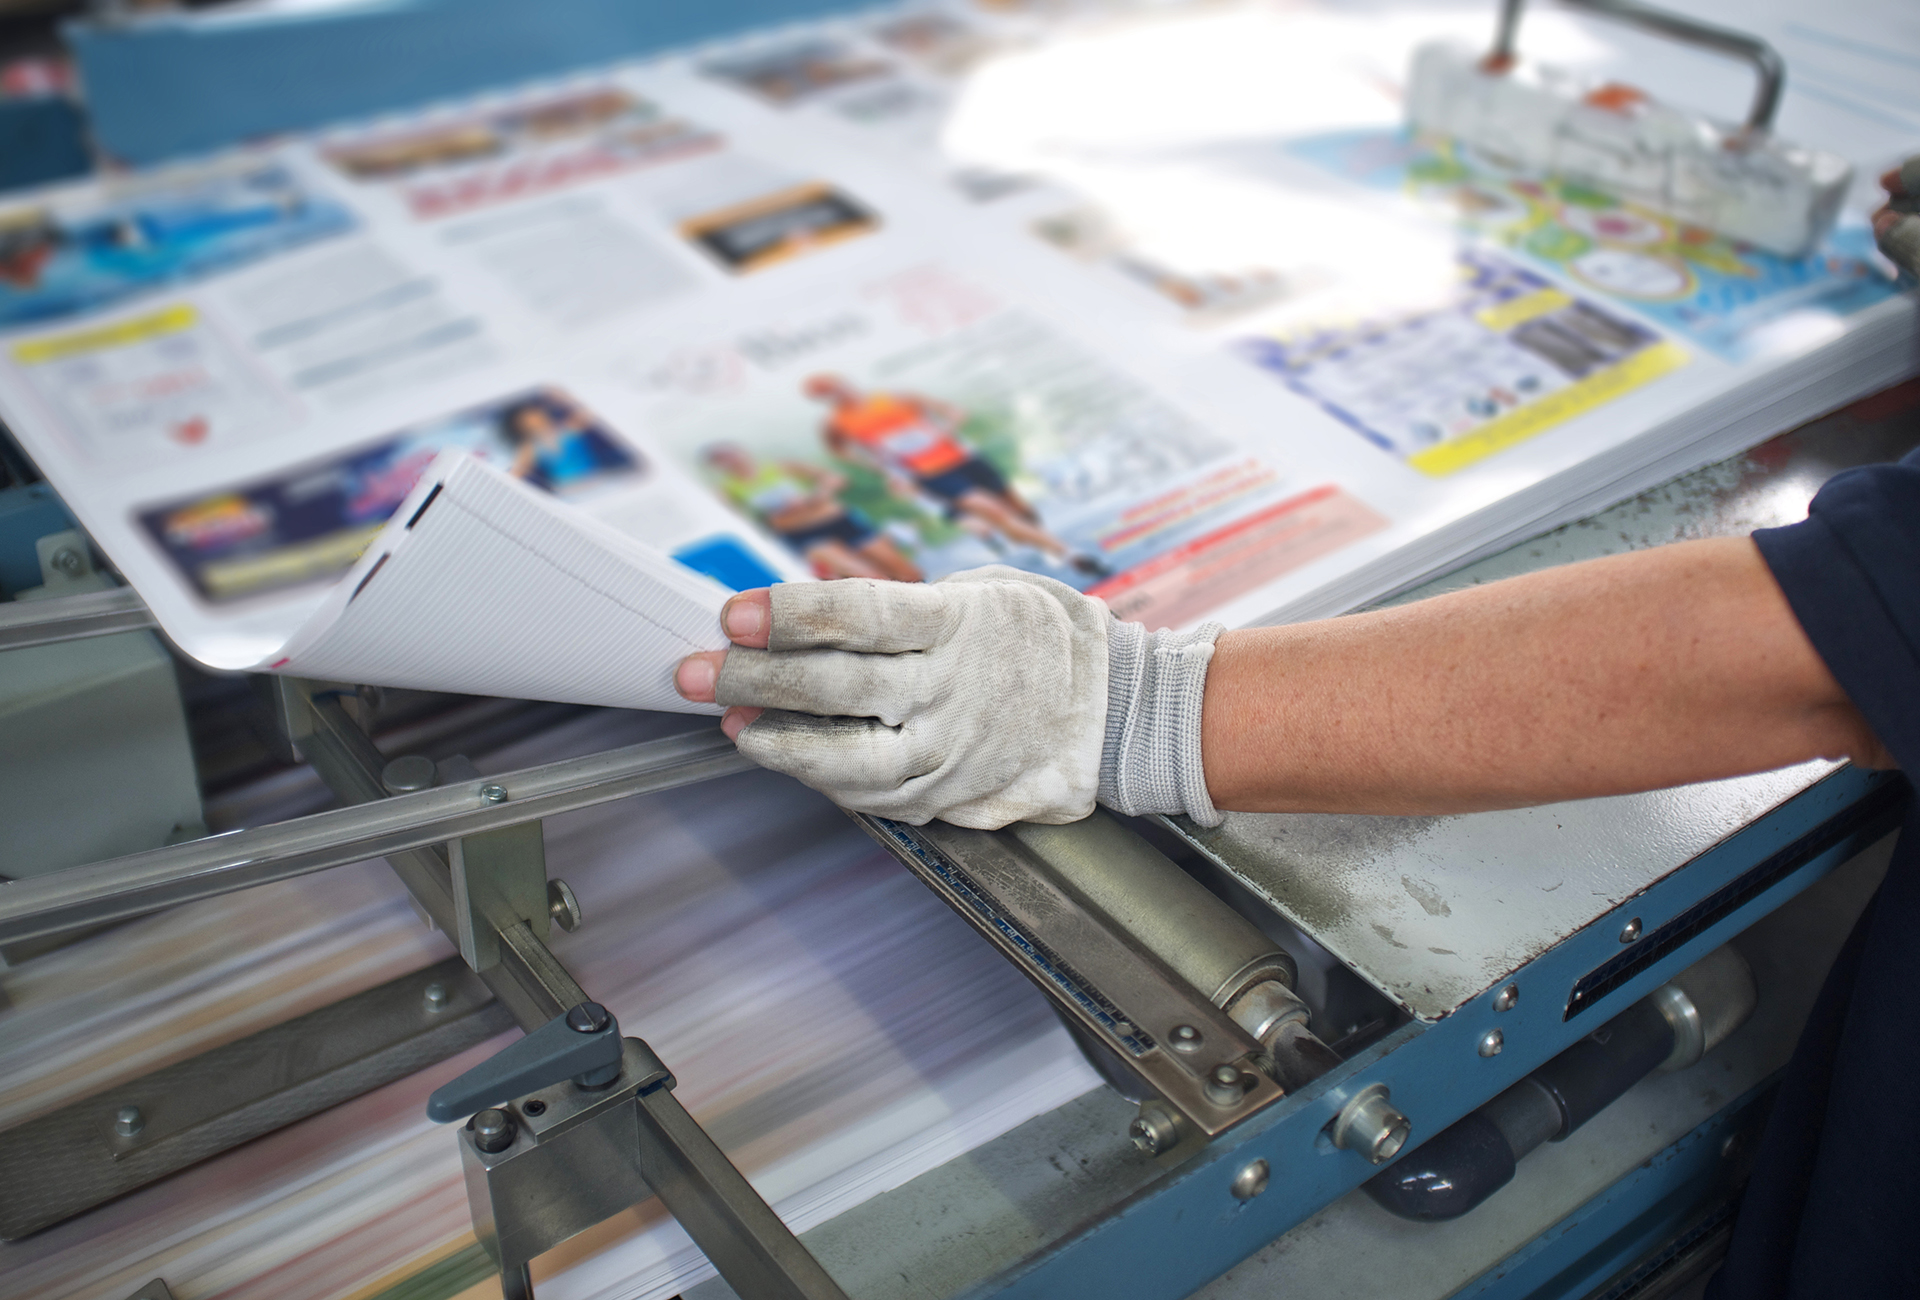 Commercial Printing